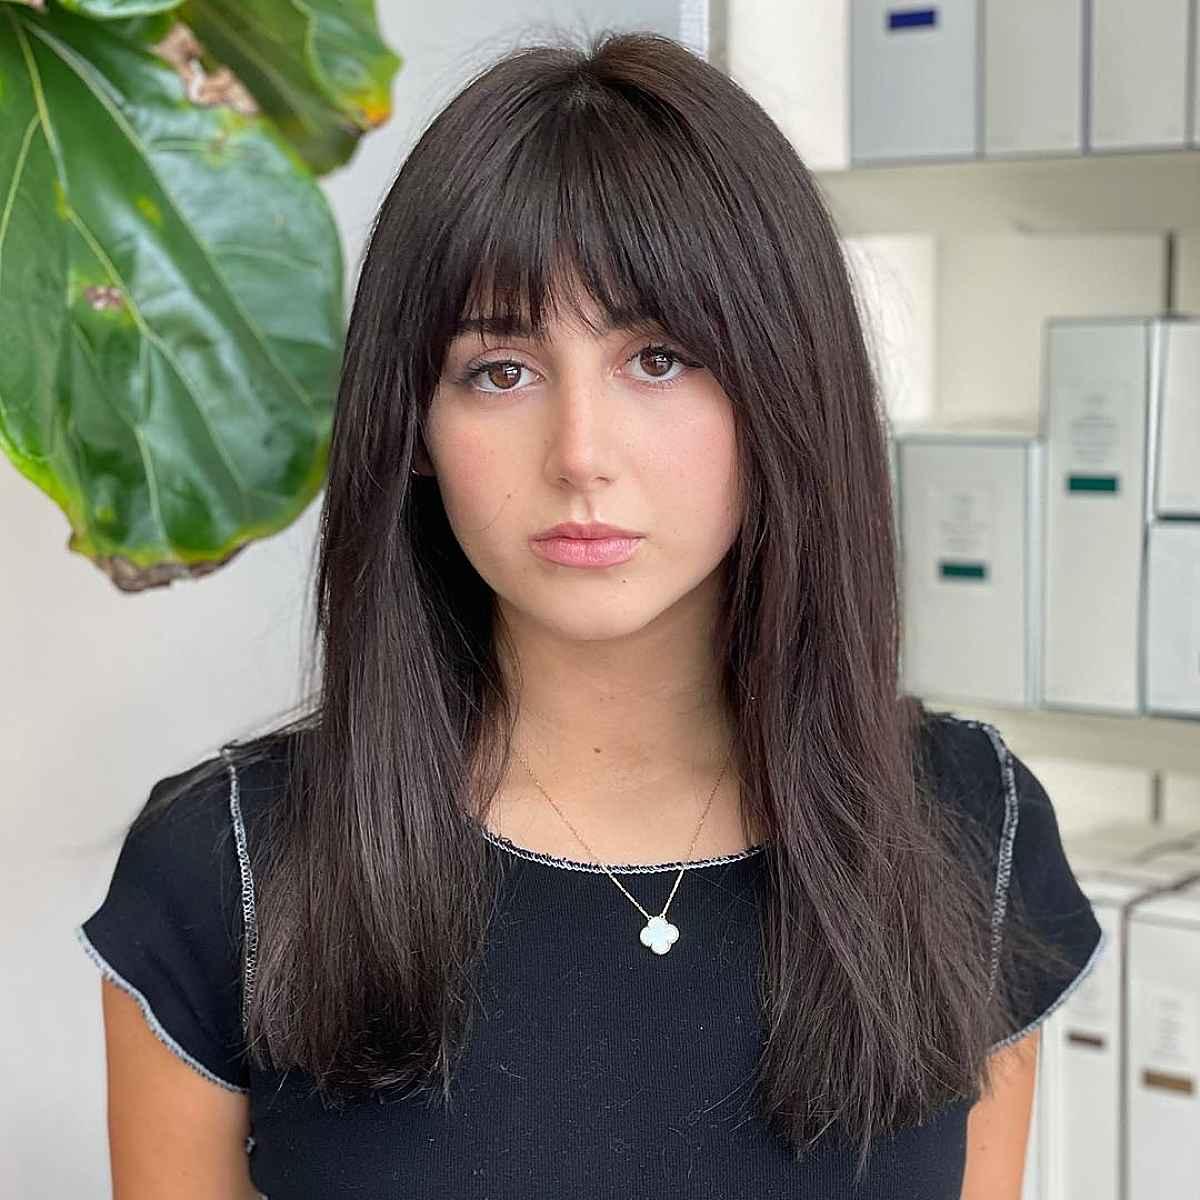 Solid and Silky Chocolate Brown Hair with Bangs